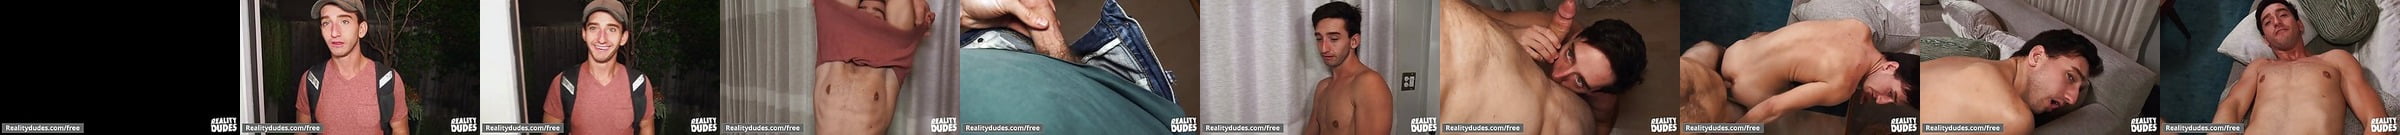 Featured Reality Dudes Gay Porn Videos 2